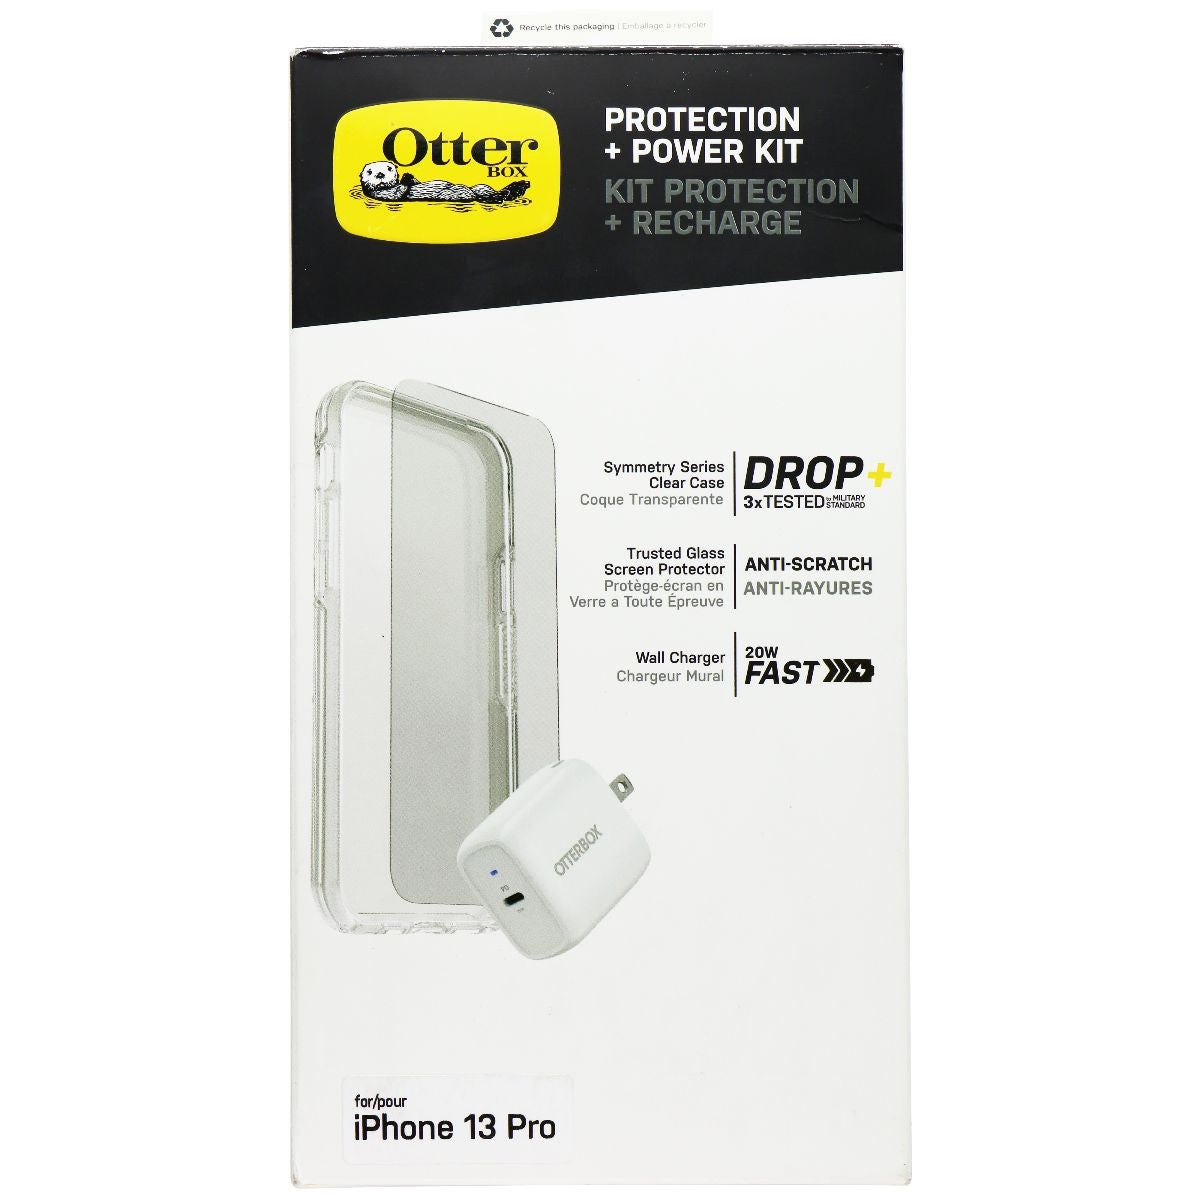 Otterbox Symmetry Clear Protection + Power Kit Bundle for iPhone 13 Pro